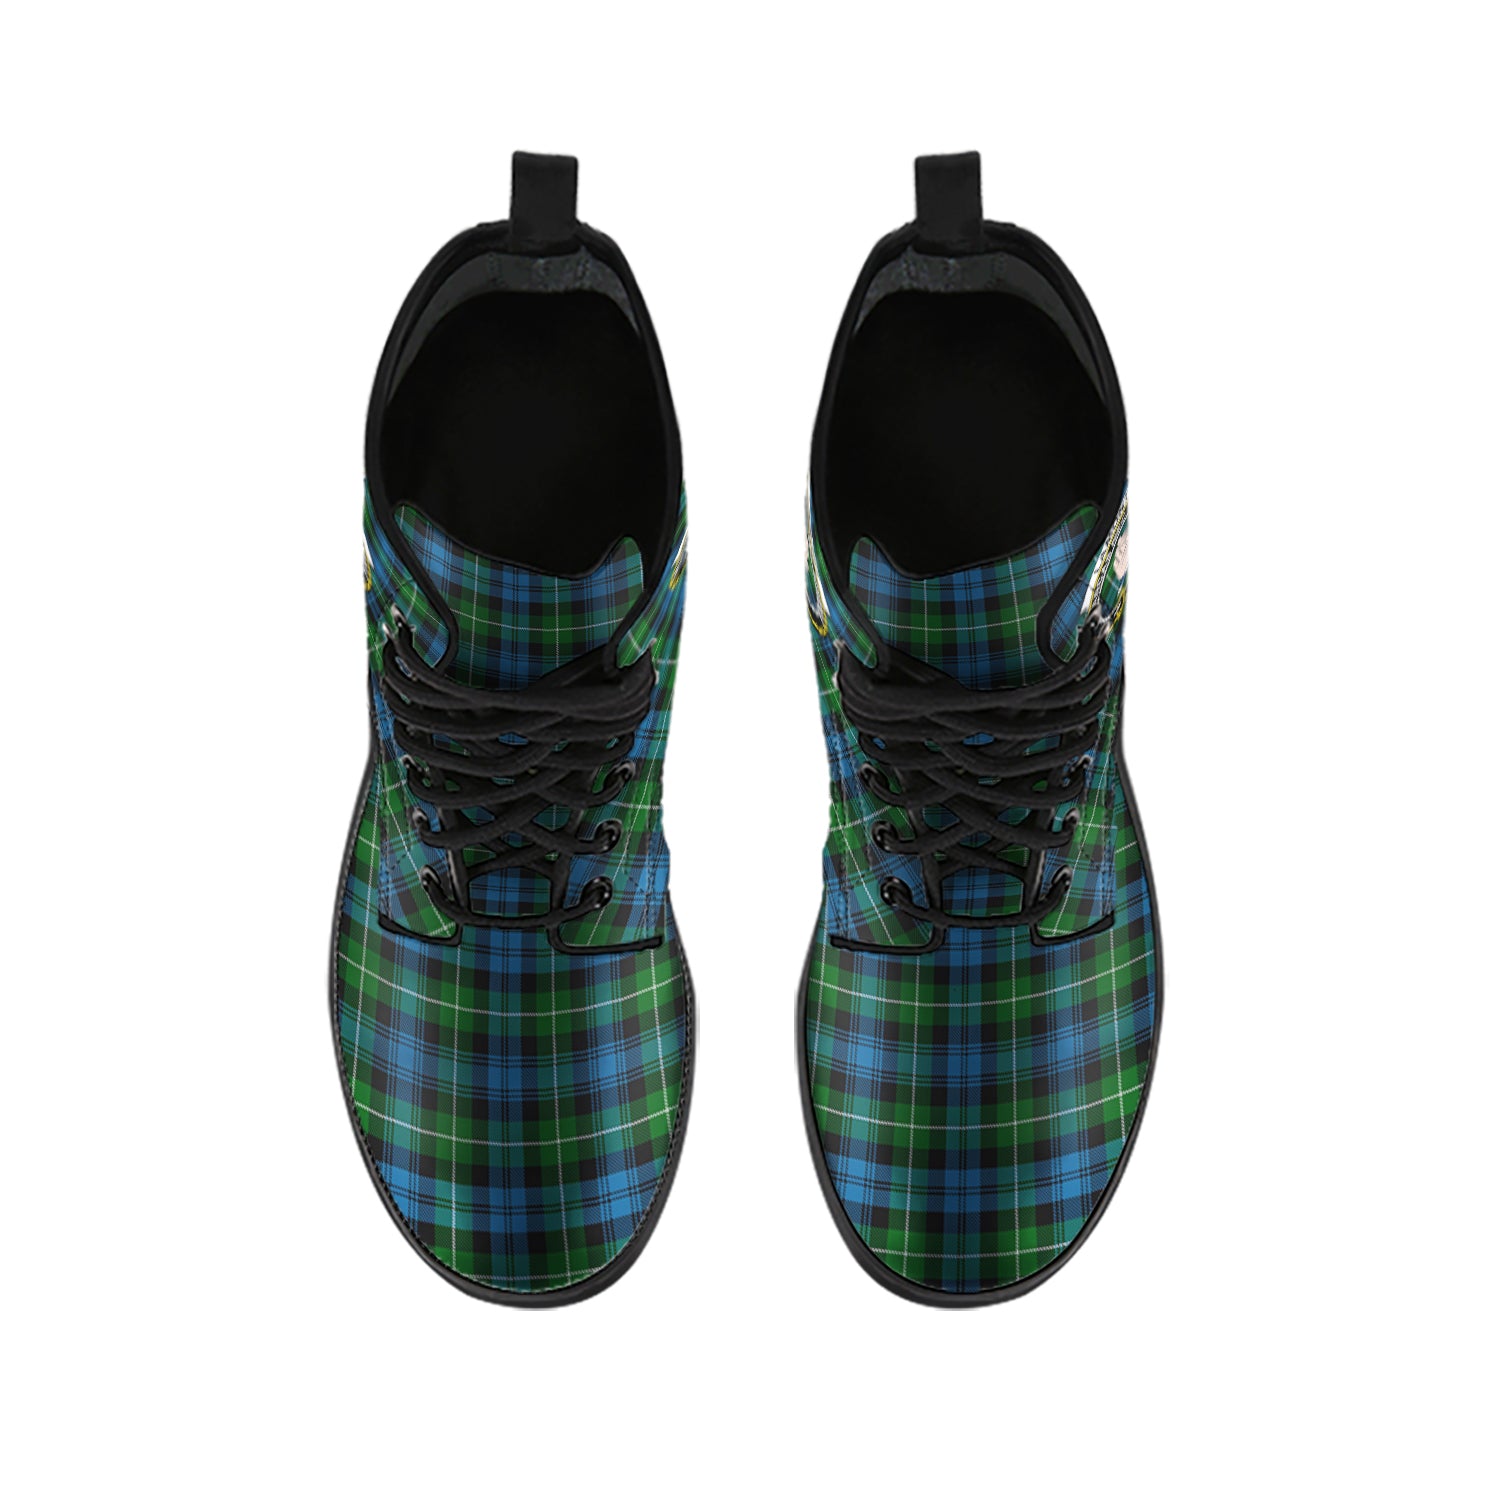 lamont-tartan-leather-boots-with-family-crest